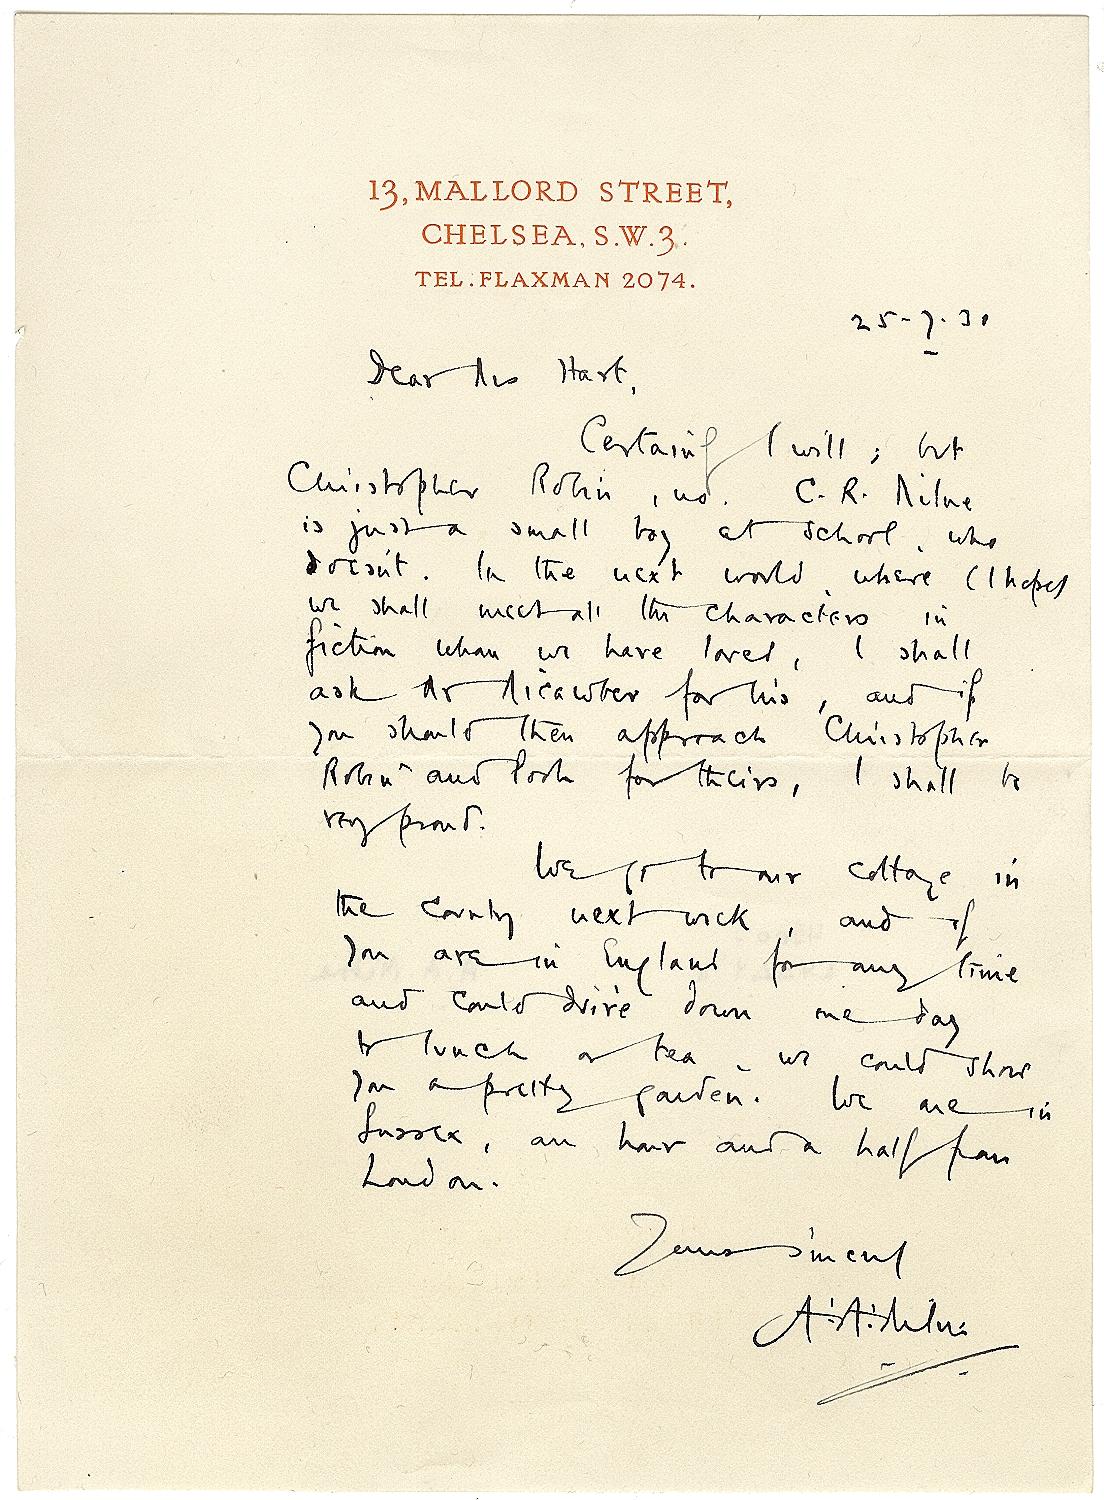 AUTHOR: MILNE, A. A.. 

TITLE: A fine ALS mentioning Christopher Robin and Pooh.

PUBLISHER: Chelsea, 1931.

DESCRIPTION: AUTOGRAPH LETTER SIGNED. 1 page, in ink, single sided, dated July 25, 1931, 5-7/16